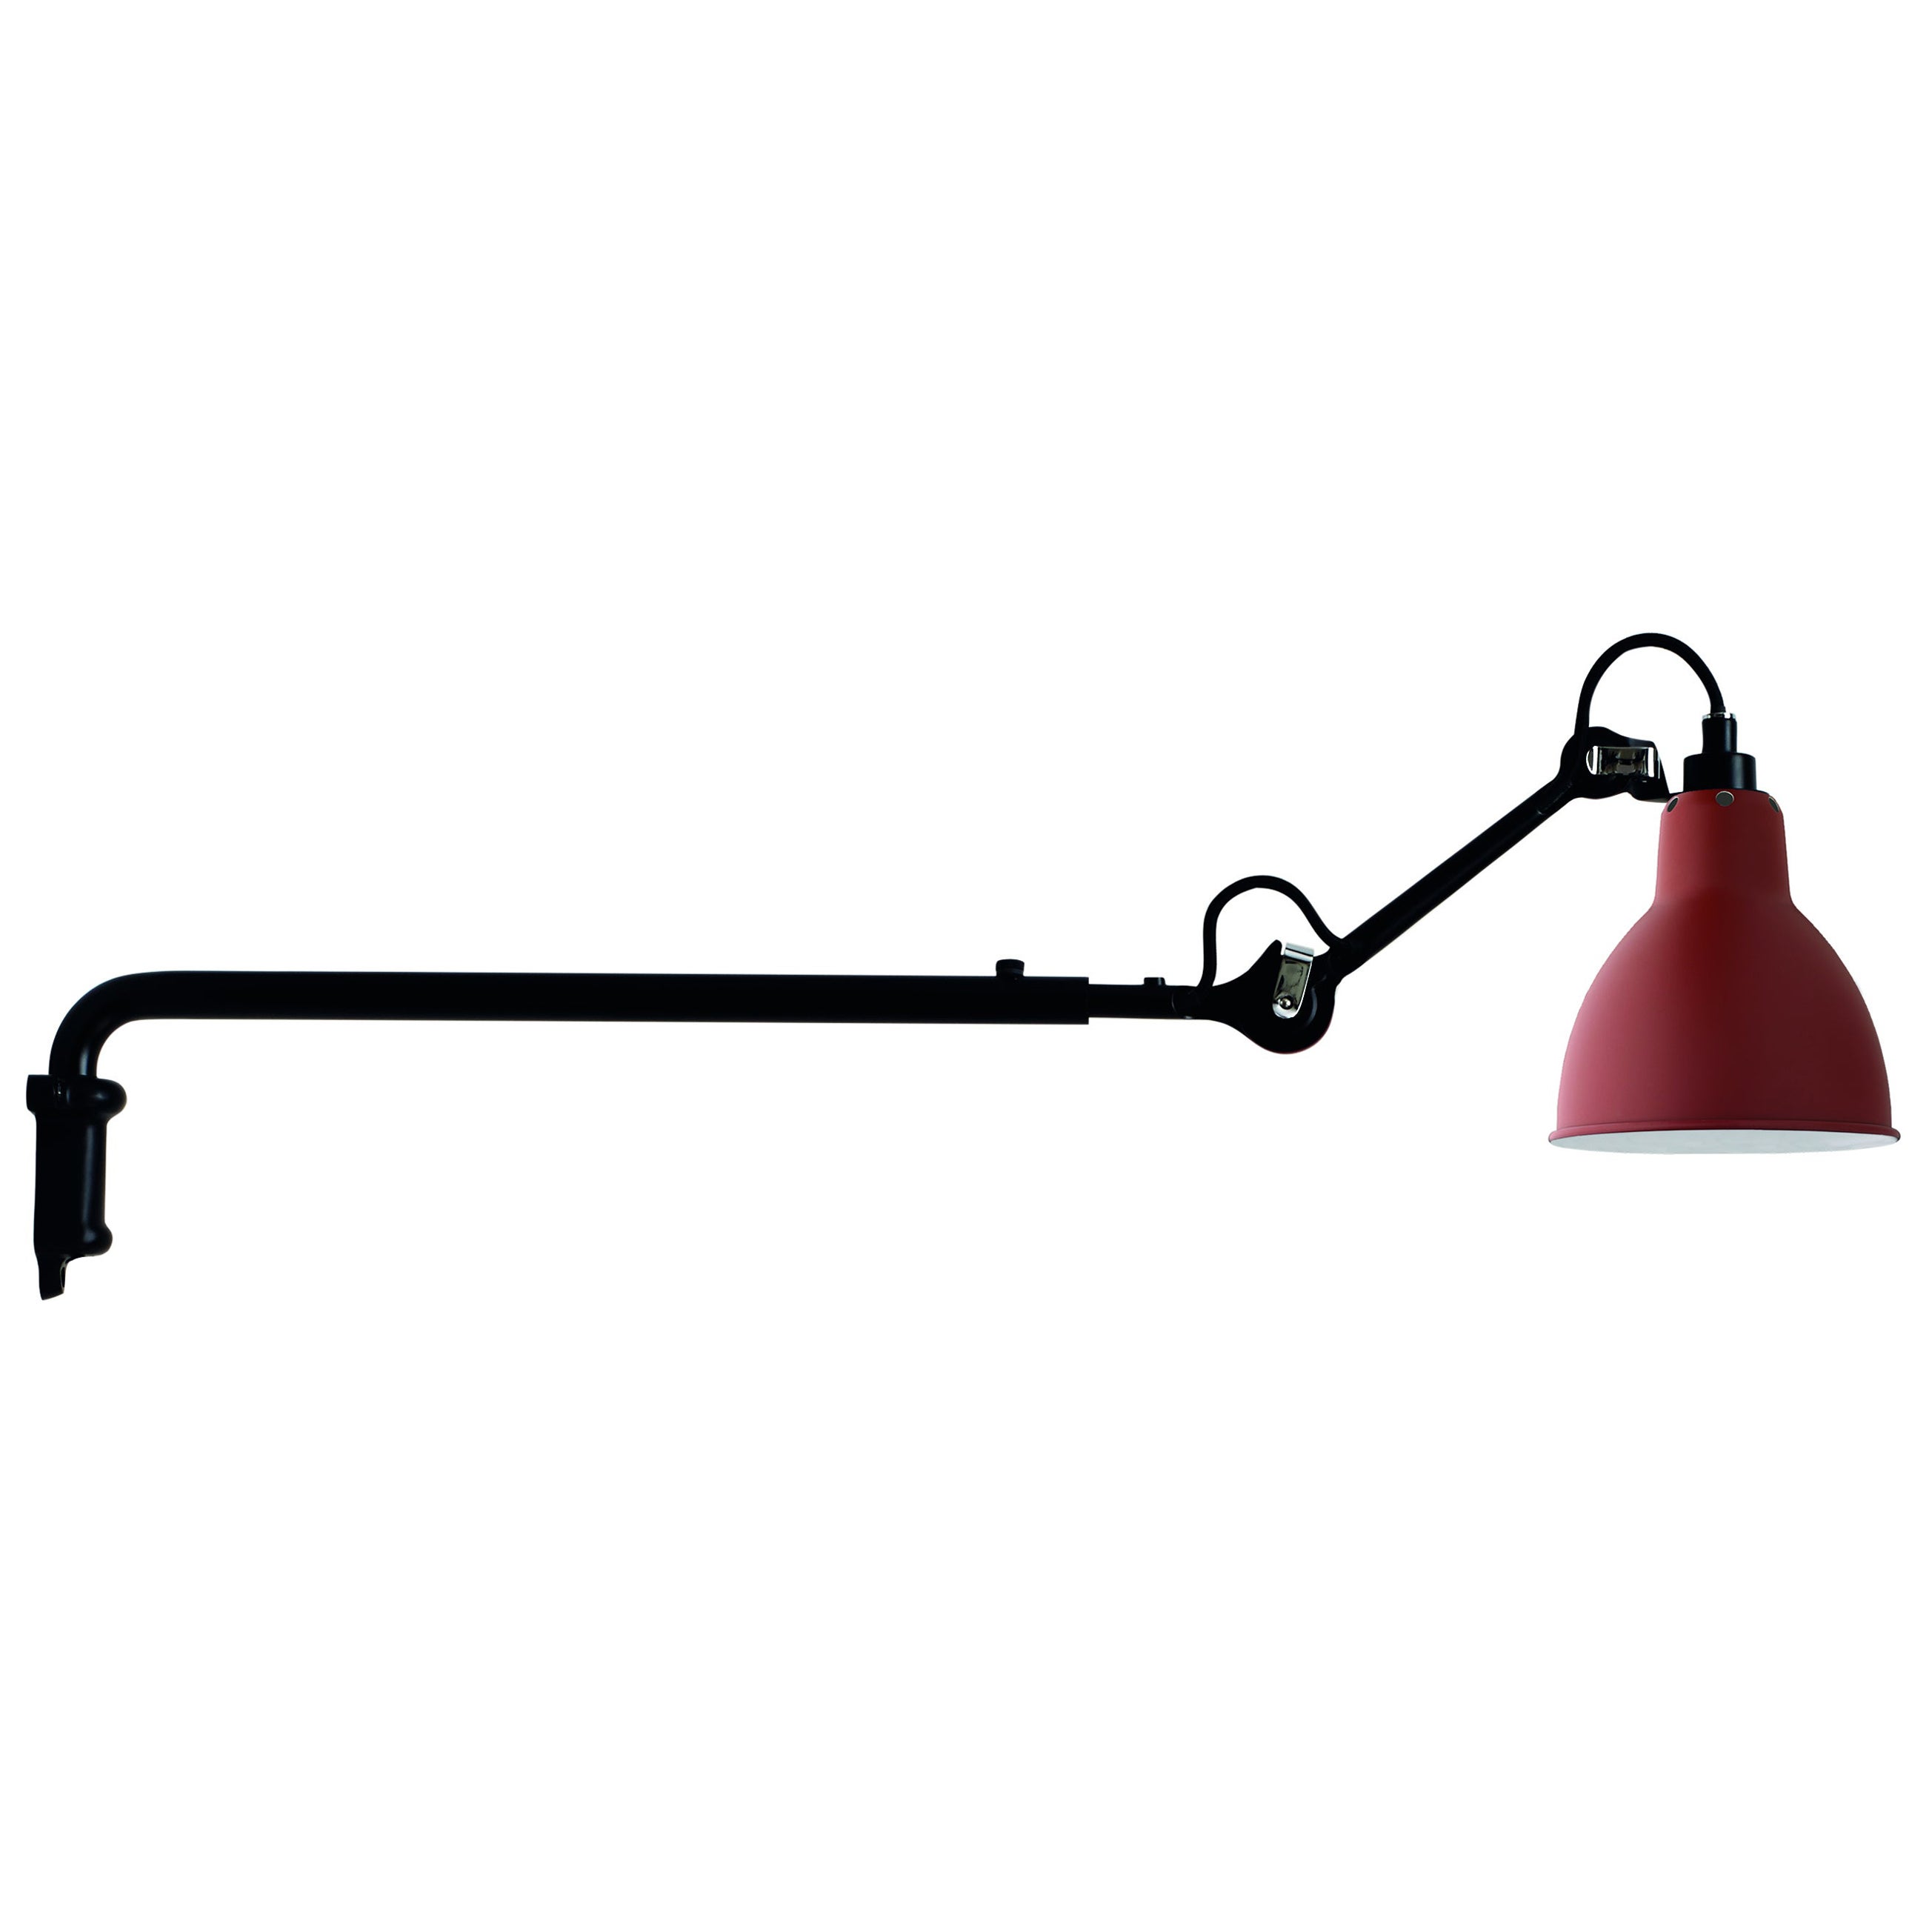 DCW Editions La Lampe Gras N°203 Wall Lamp in Black Steel Arm and Red Shade For Sale